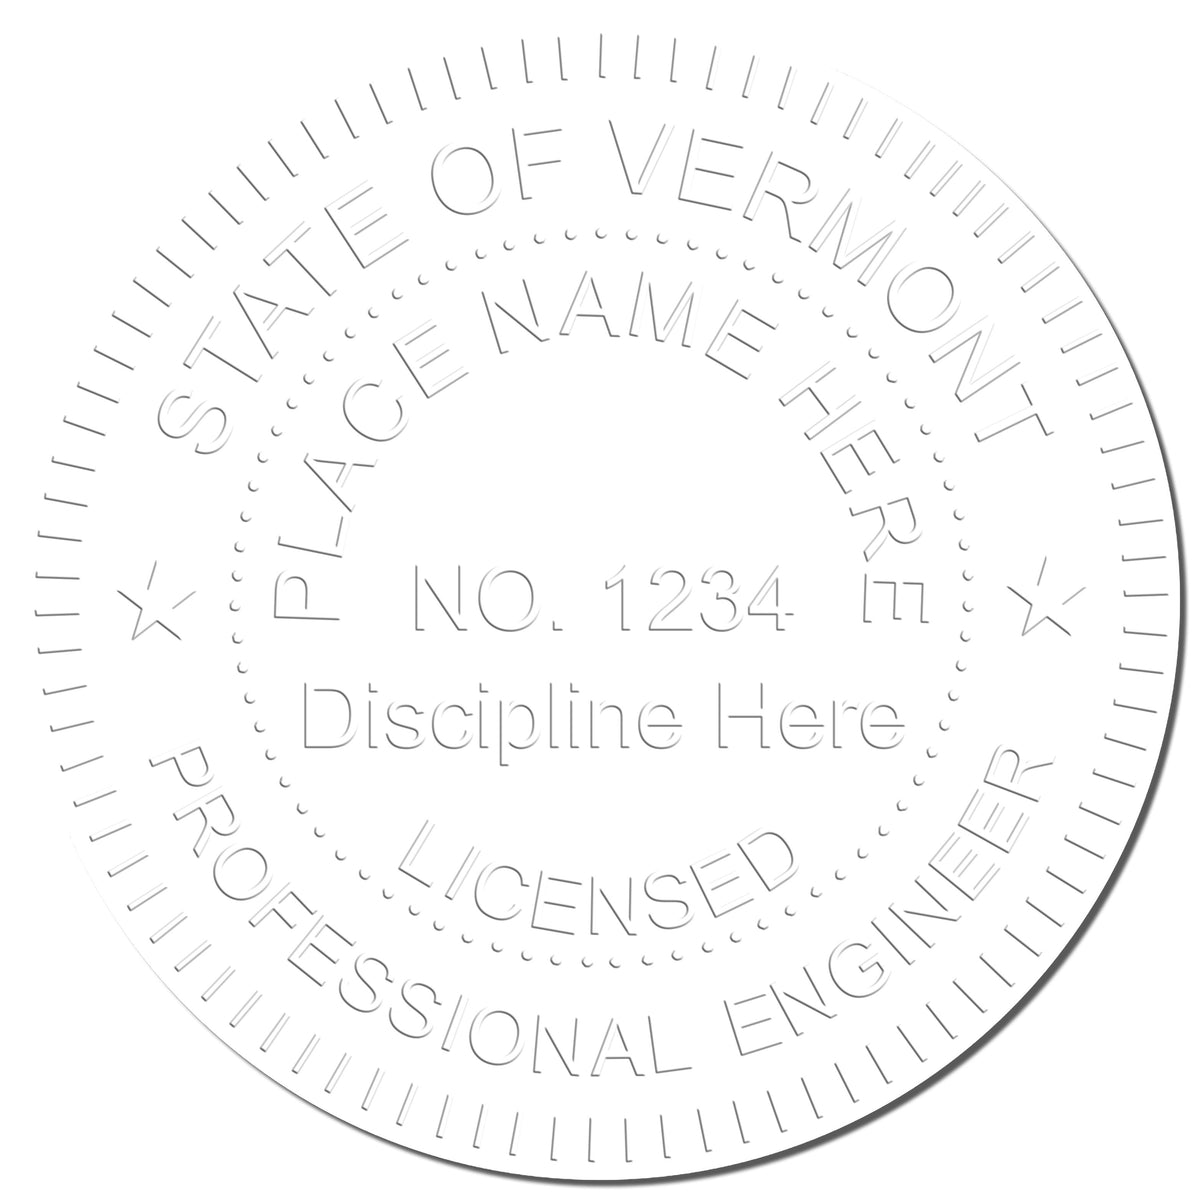 This paper is stamped with a sample imprint of the State of Vermont Extended Long Reach Engineer Seal, signifying its quality and reliability.